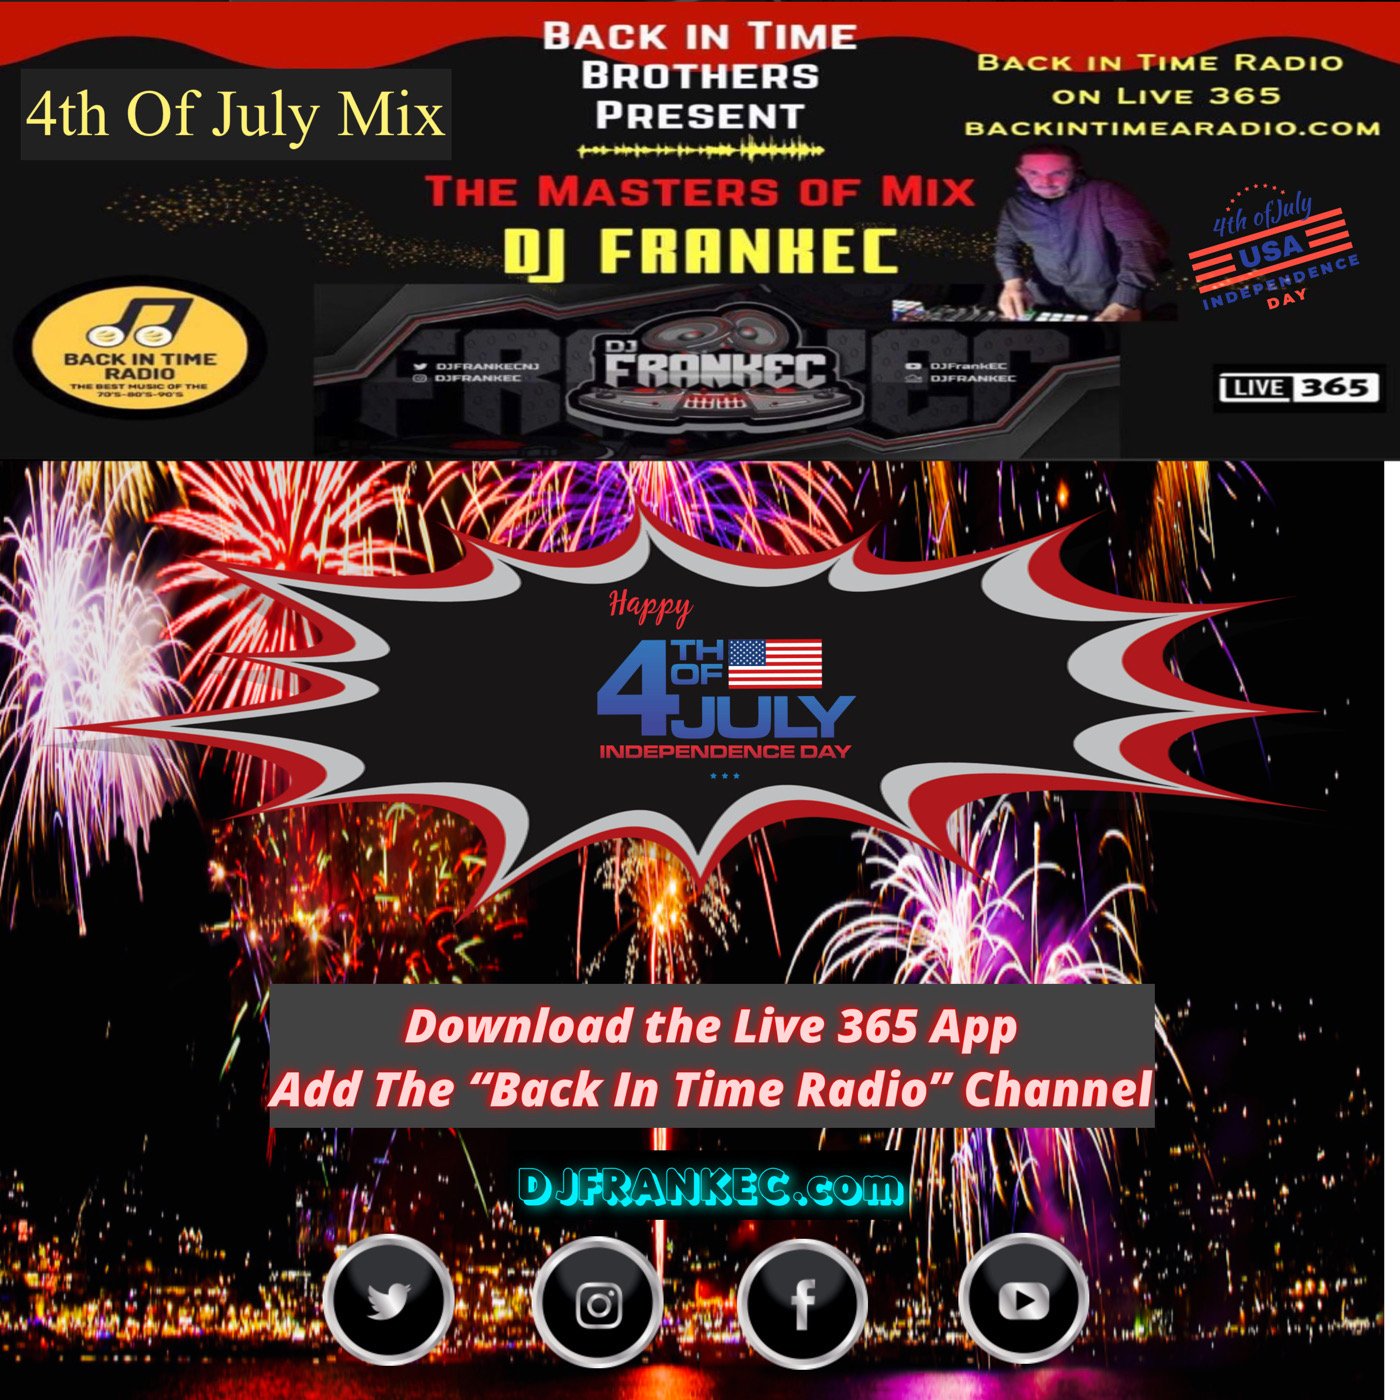 4th Of July 2022 Mix by DJ FrankEC on Back In Time Radio